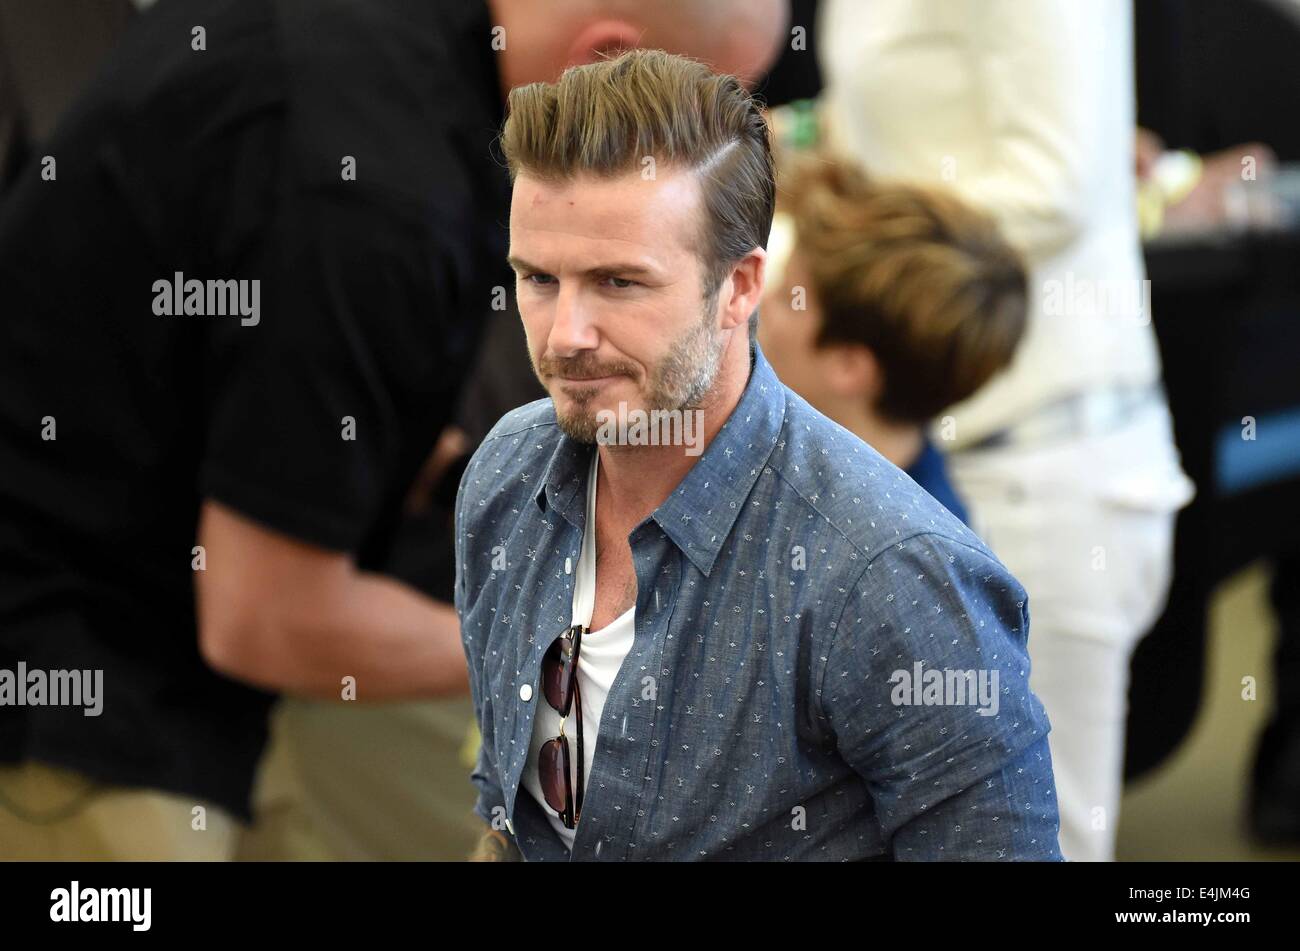 Rio de Janeiro, Brazil. 13th July, 2014. English former soccer player David Beckham seen in the stands before the FIFA World Cup 2014 final soccer match between Germany and Argentina at the Estadio do Maracana in Rio de Janeiro, Brazil, 13 July 2014. Photo: Thomas Eisenhuth/dpa/Alamy Live News Stock Photo